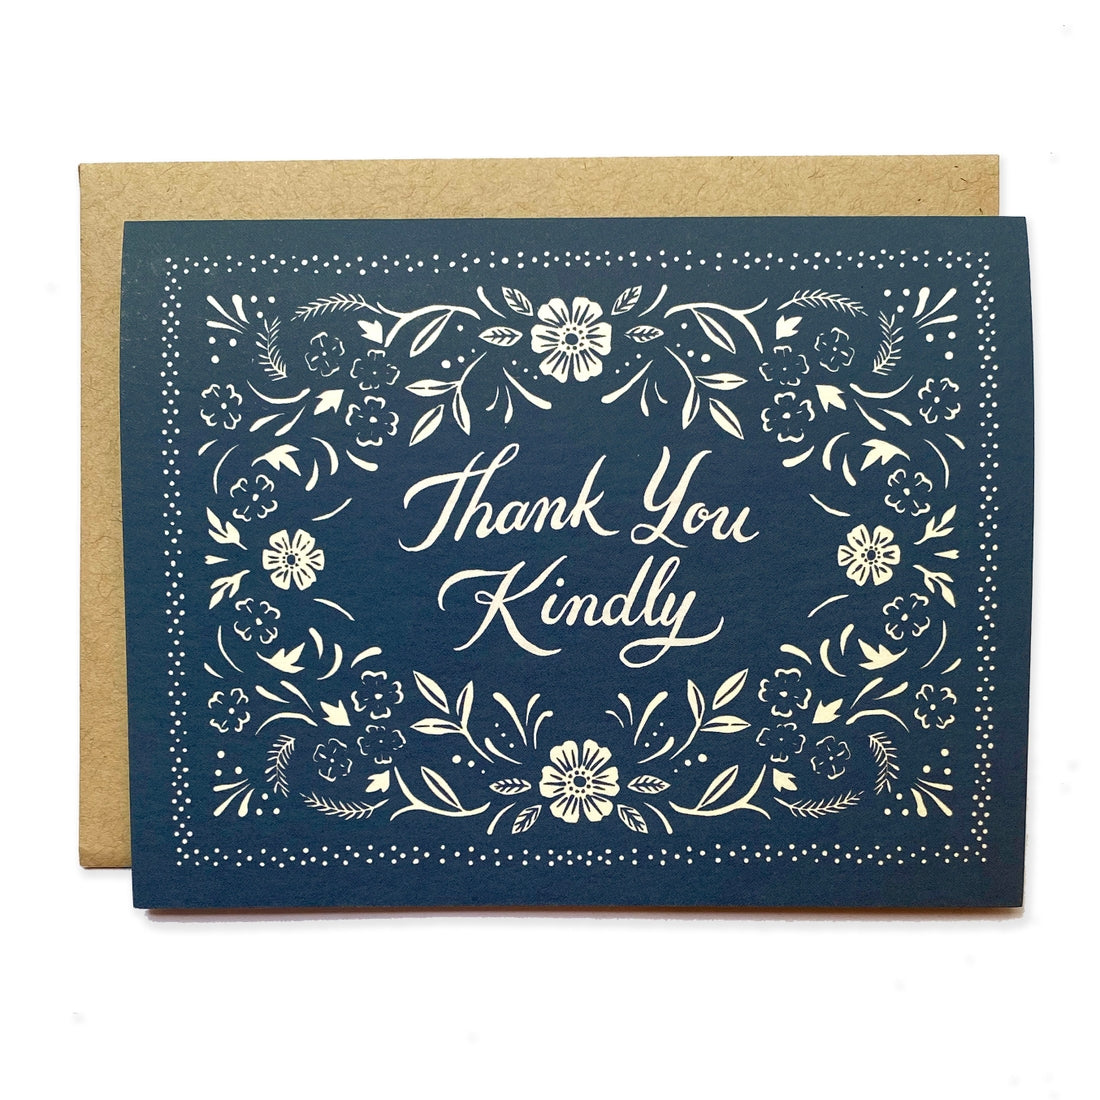 Thank You Card: Thank You Kindly